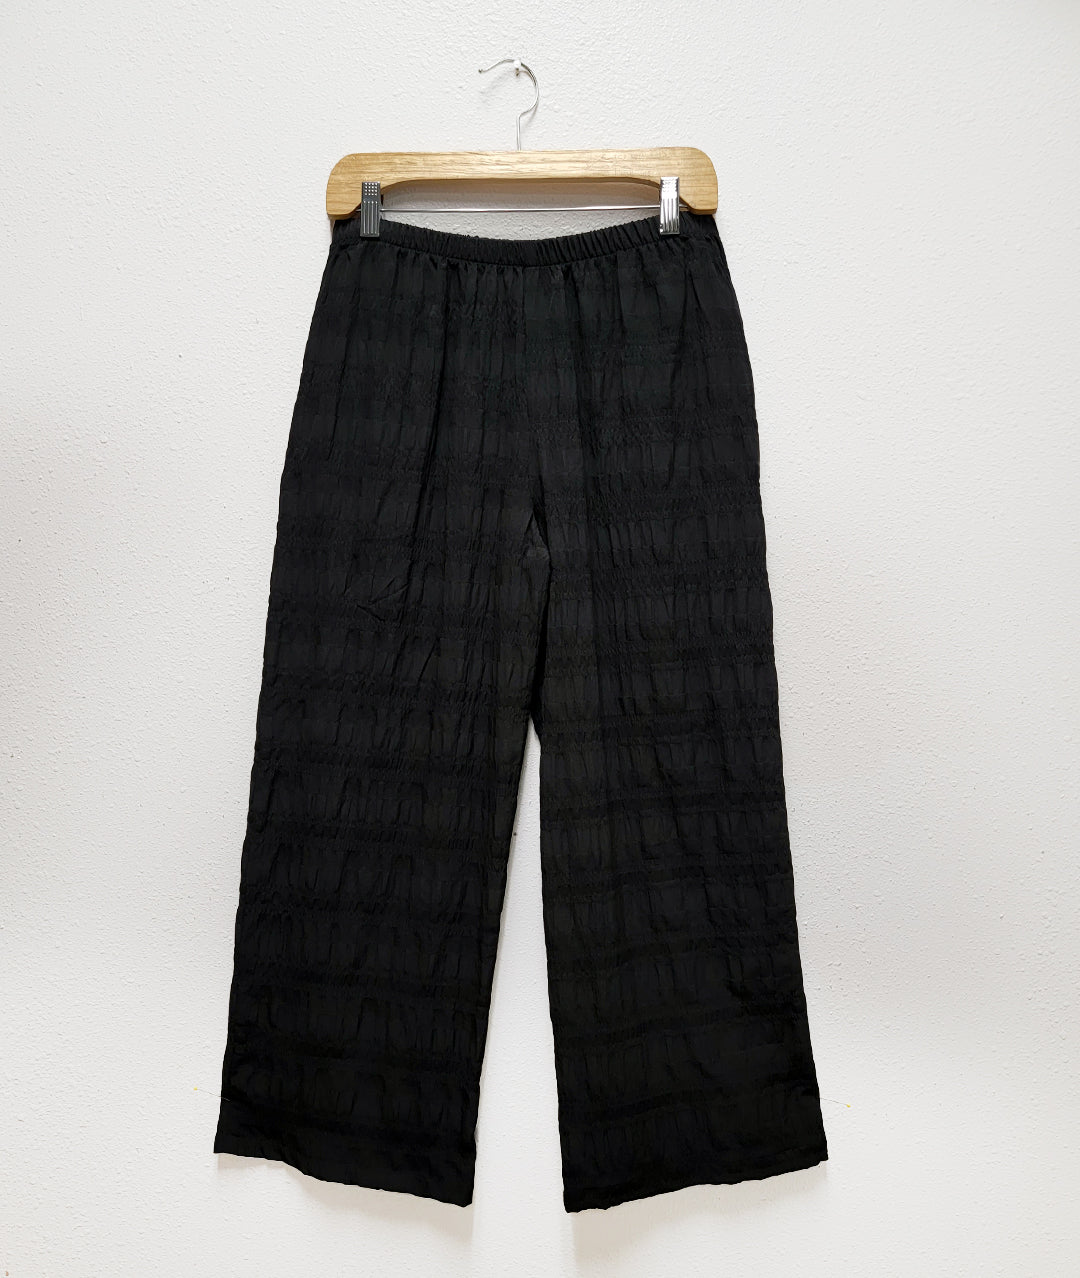 black wide leg pant with a soft striped pattern